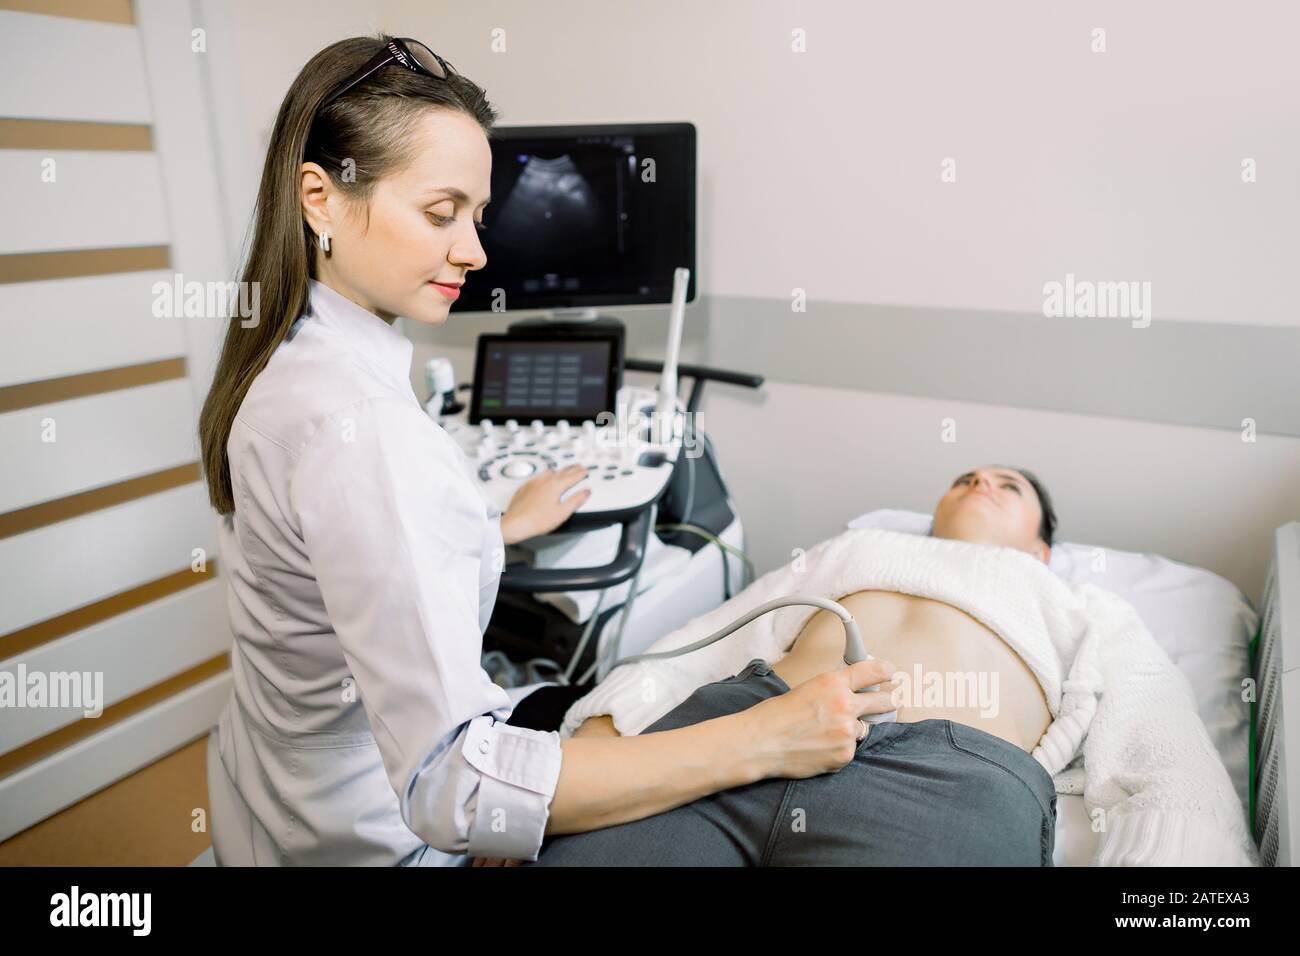 Pretty female doctor operating modern ultrasound scanner while examining belly and bladder of her female patient. Stock Photo